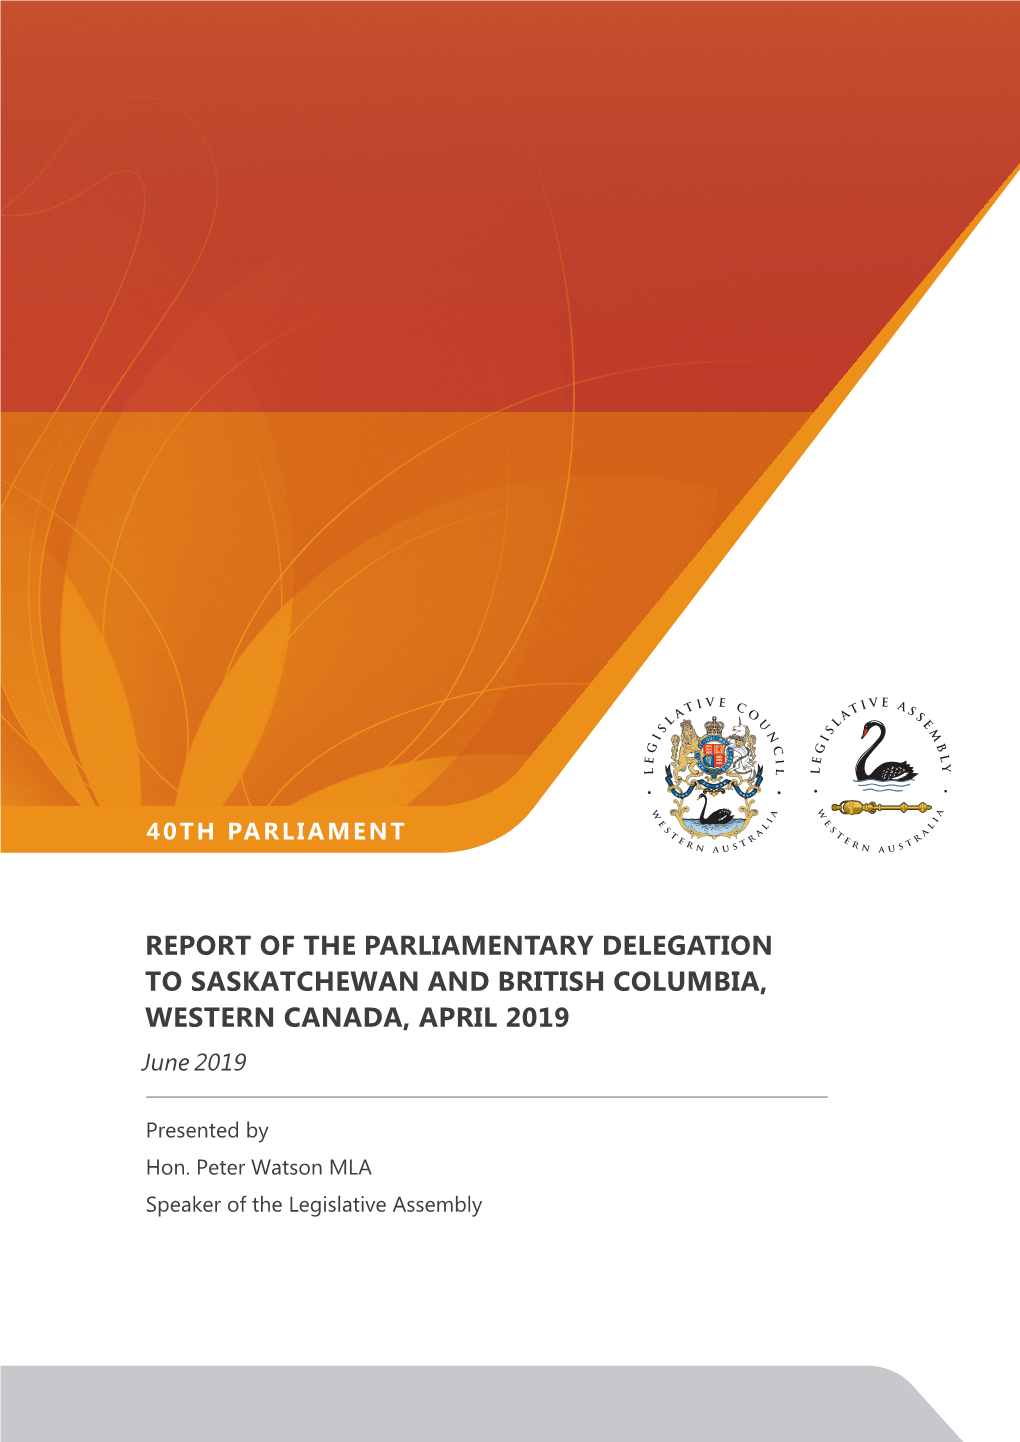 REPORT of the PARLIAMENTARY DELEGATION to SASKATCHEWAN and BRITISH COLUMBIA, WESTERN CANADA, APRIL 2019 June 2019